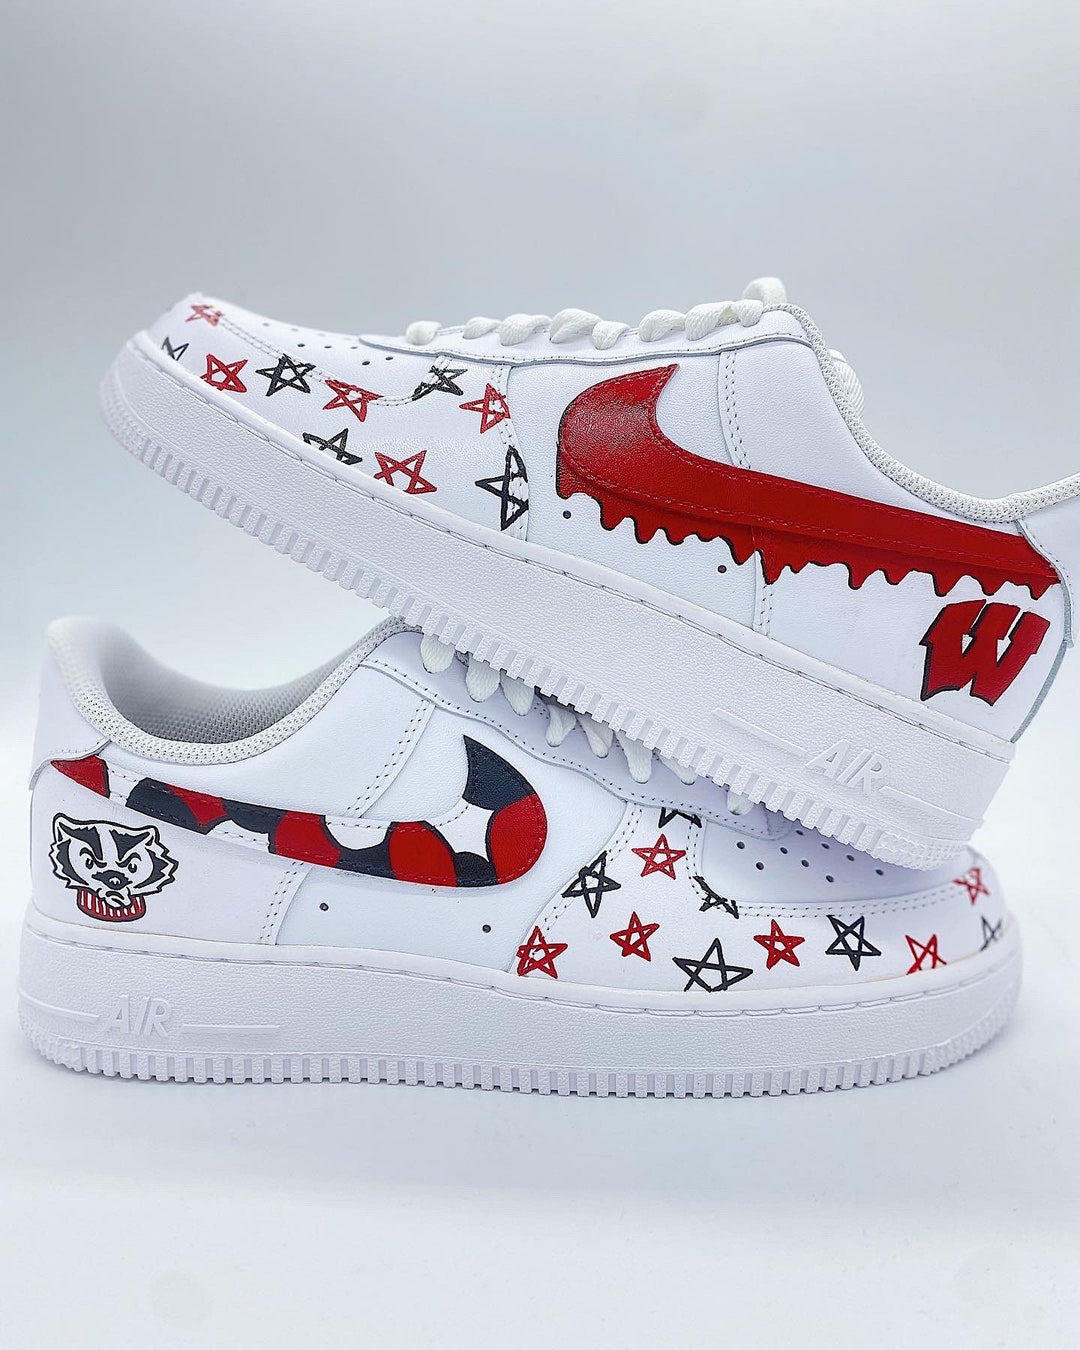 customize air force shoes in nashville｜TikTok Search